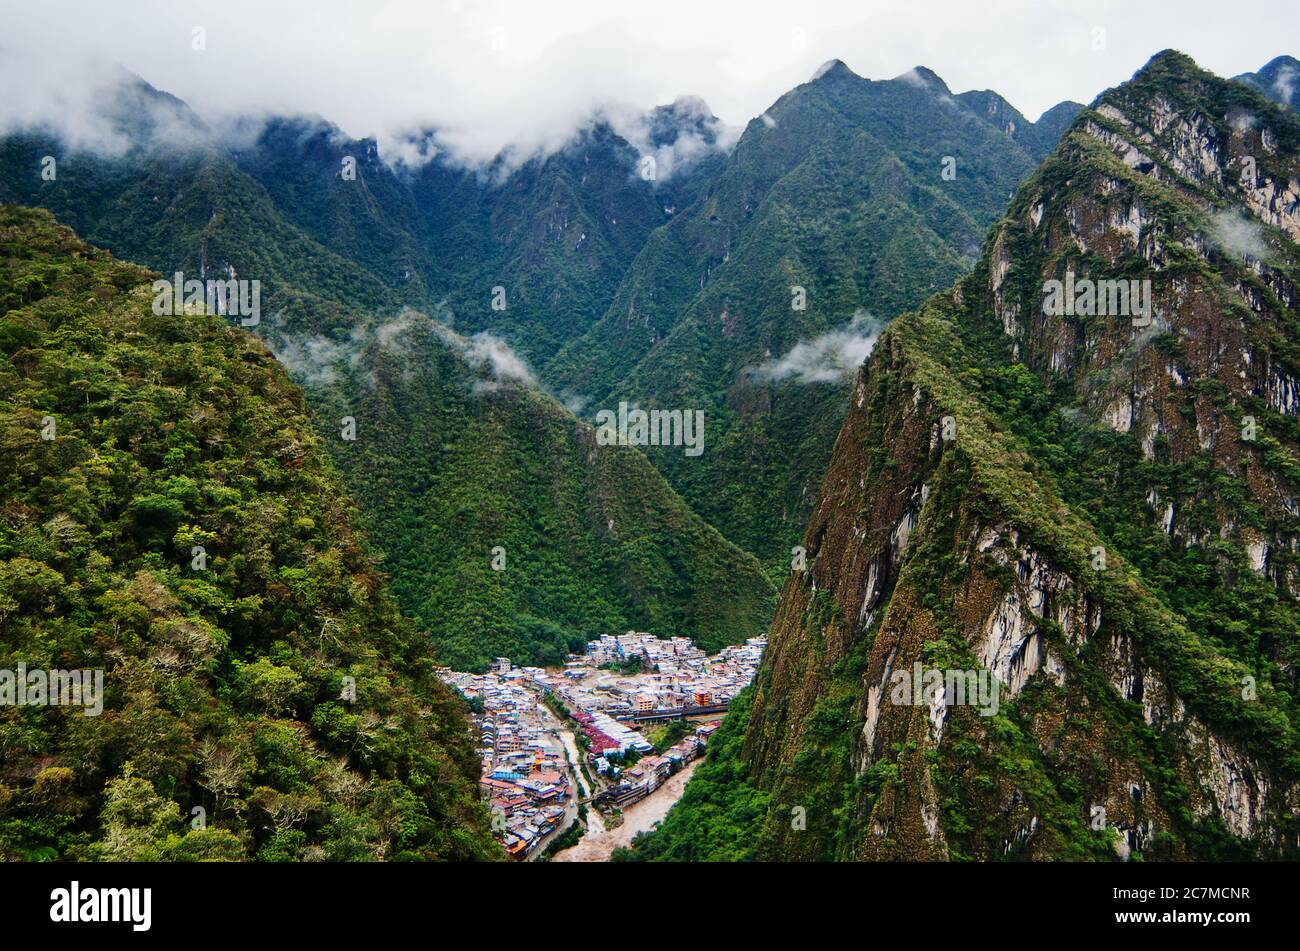 The green Andes mountains surrounding the town of Aguas Calientes, Cusco, Peru, South America Stock Photo